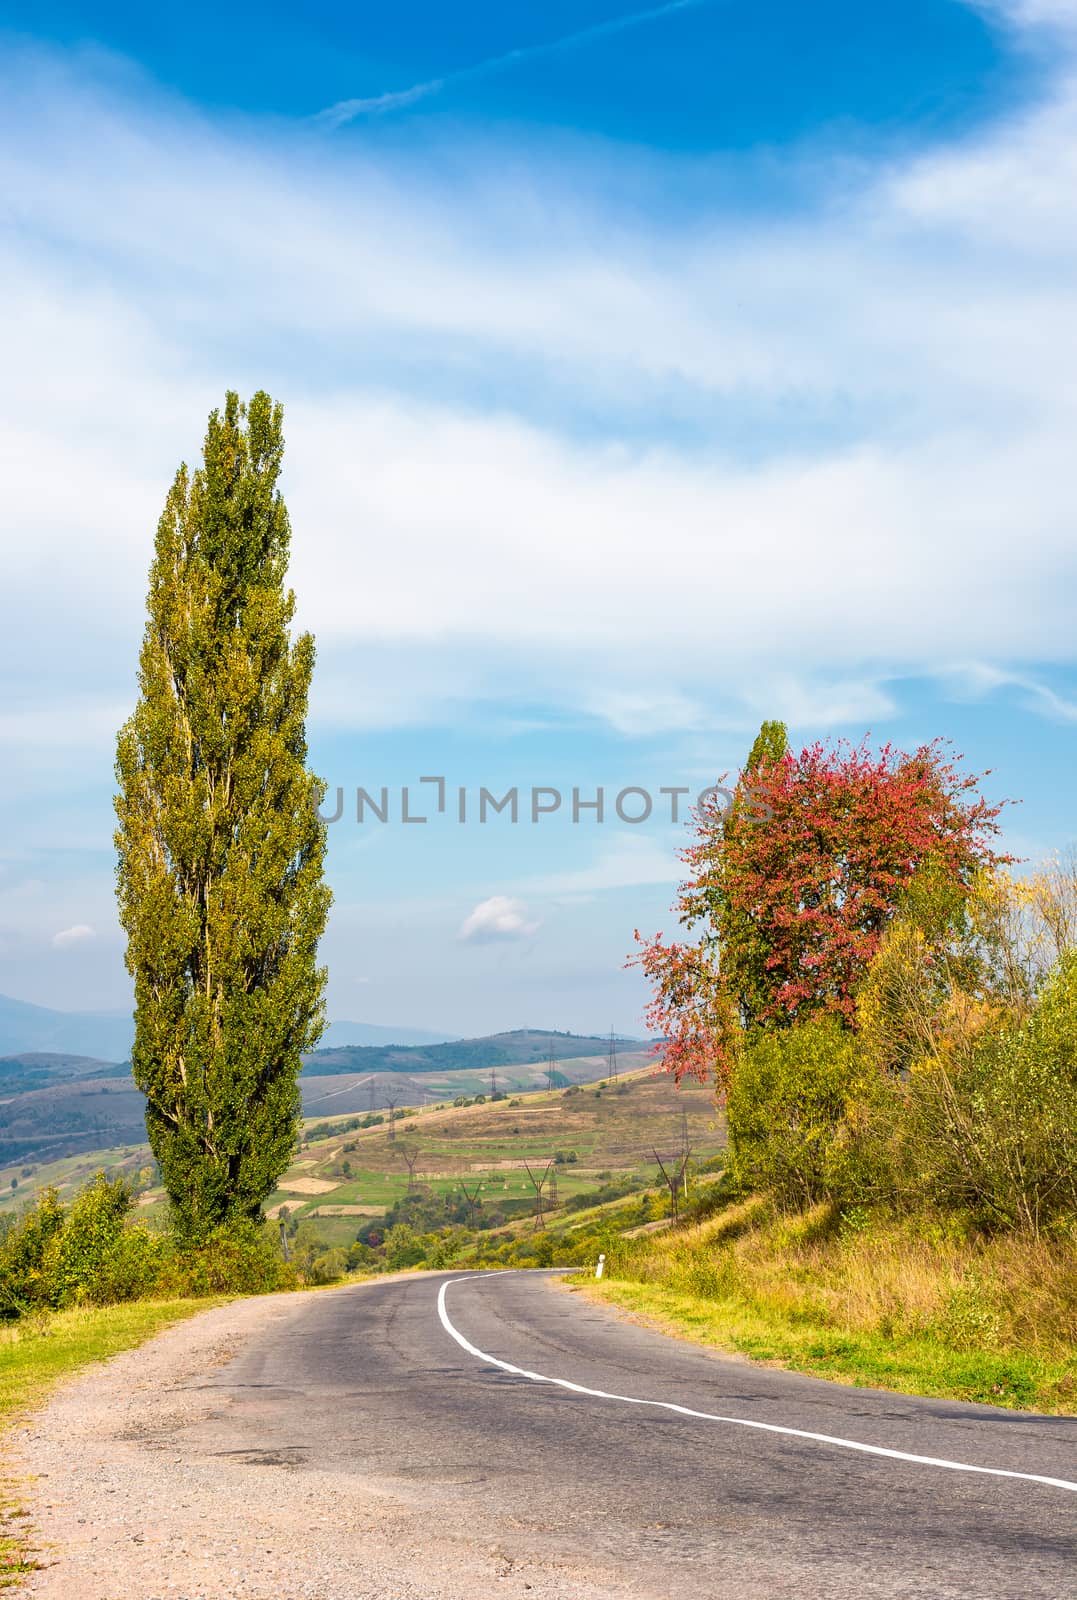 asphalt country road through hills with trees by Pellinni